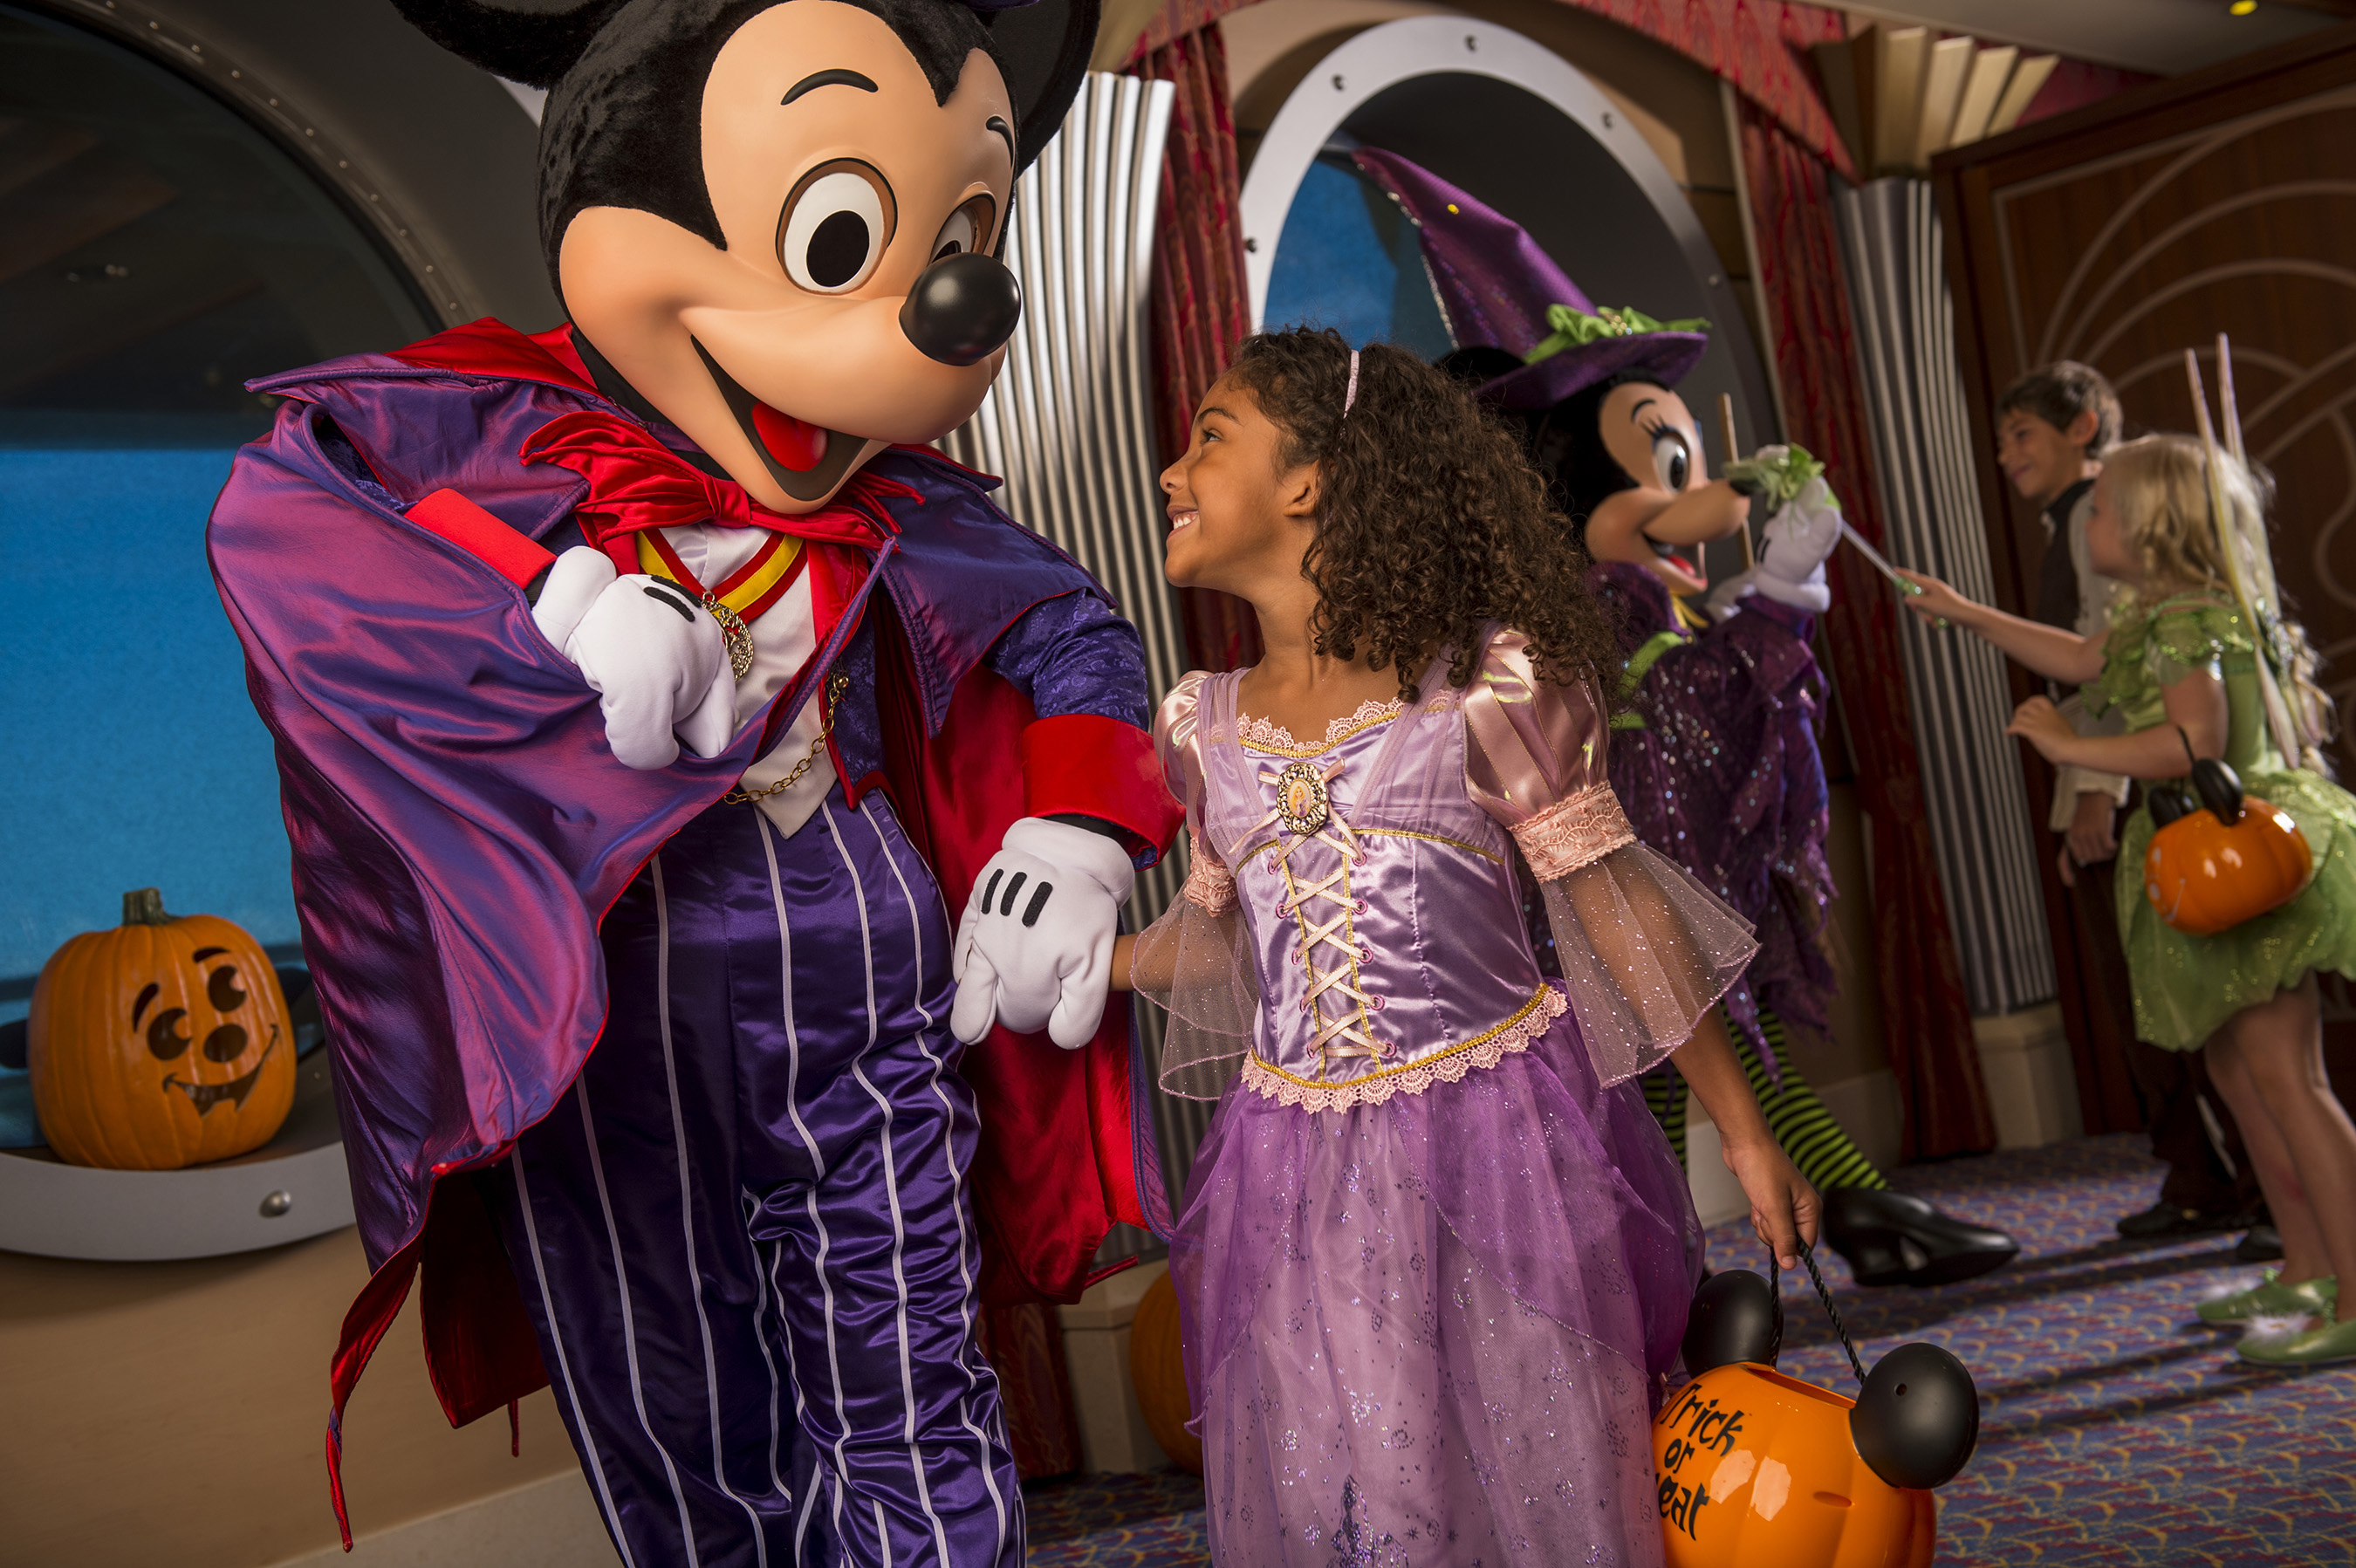 Disney Cruise Line will treat guests sailing this fall to a wickedly good time as the Disney ships transform into a ghoulish wonderland during Halloween on the High Seas cruises. This extra-spooky celebration features Halloween-themed parties, lively entertainment, elaborate décor, and frightfully fun events and activities. (Matt Stroshane, photographer)